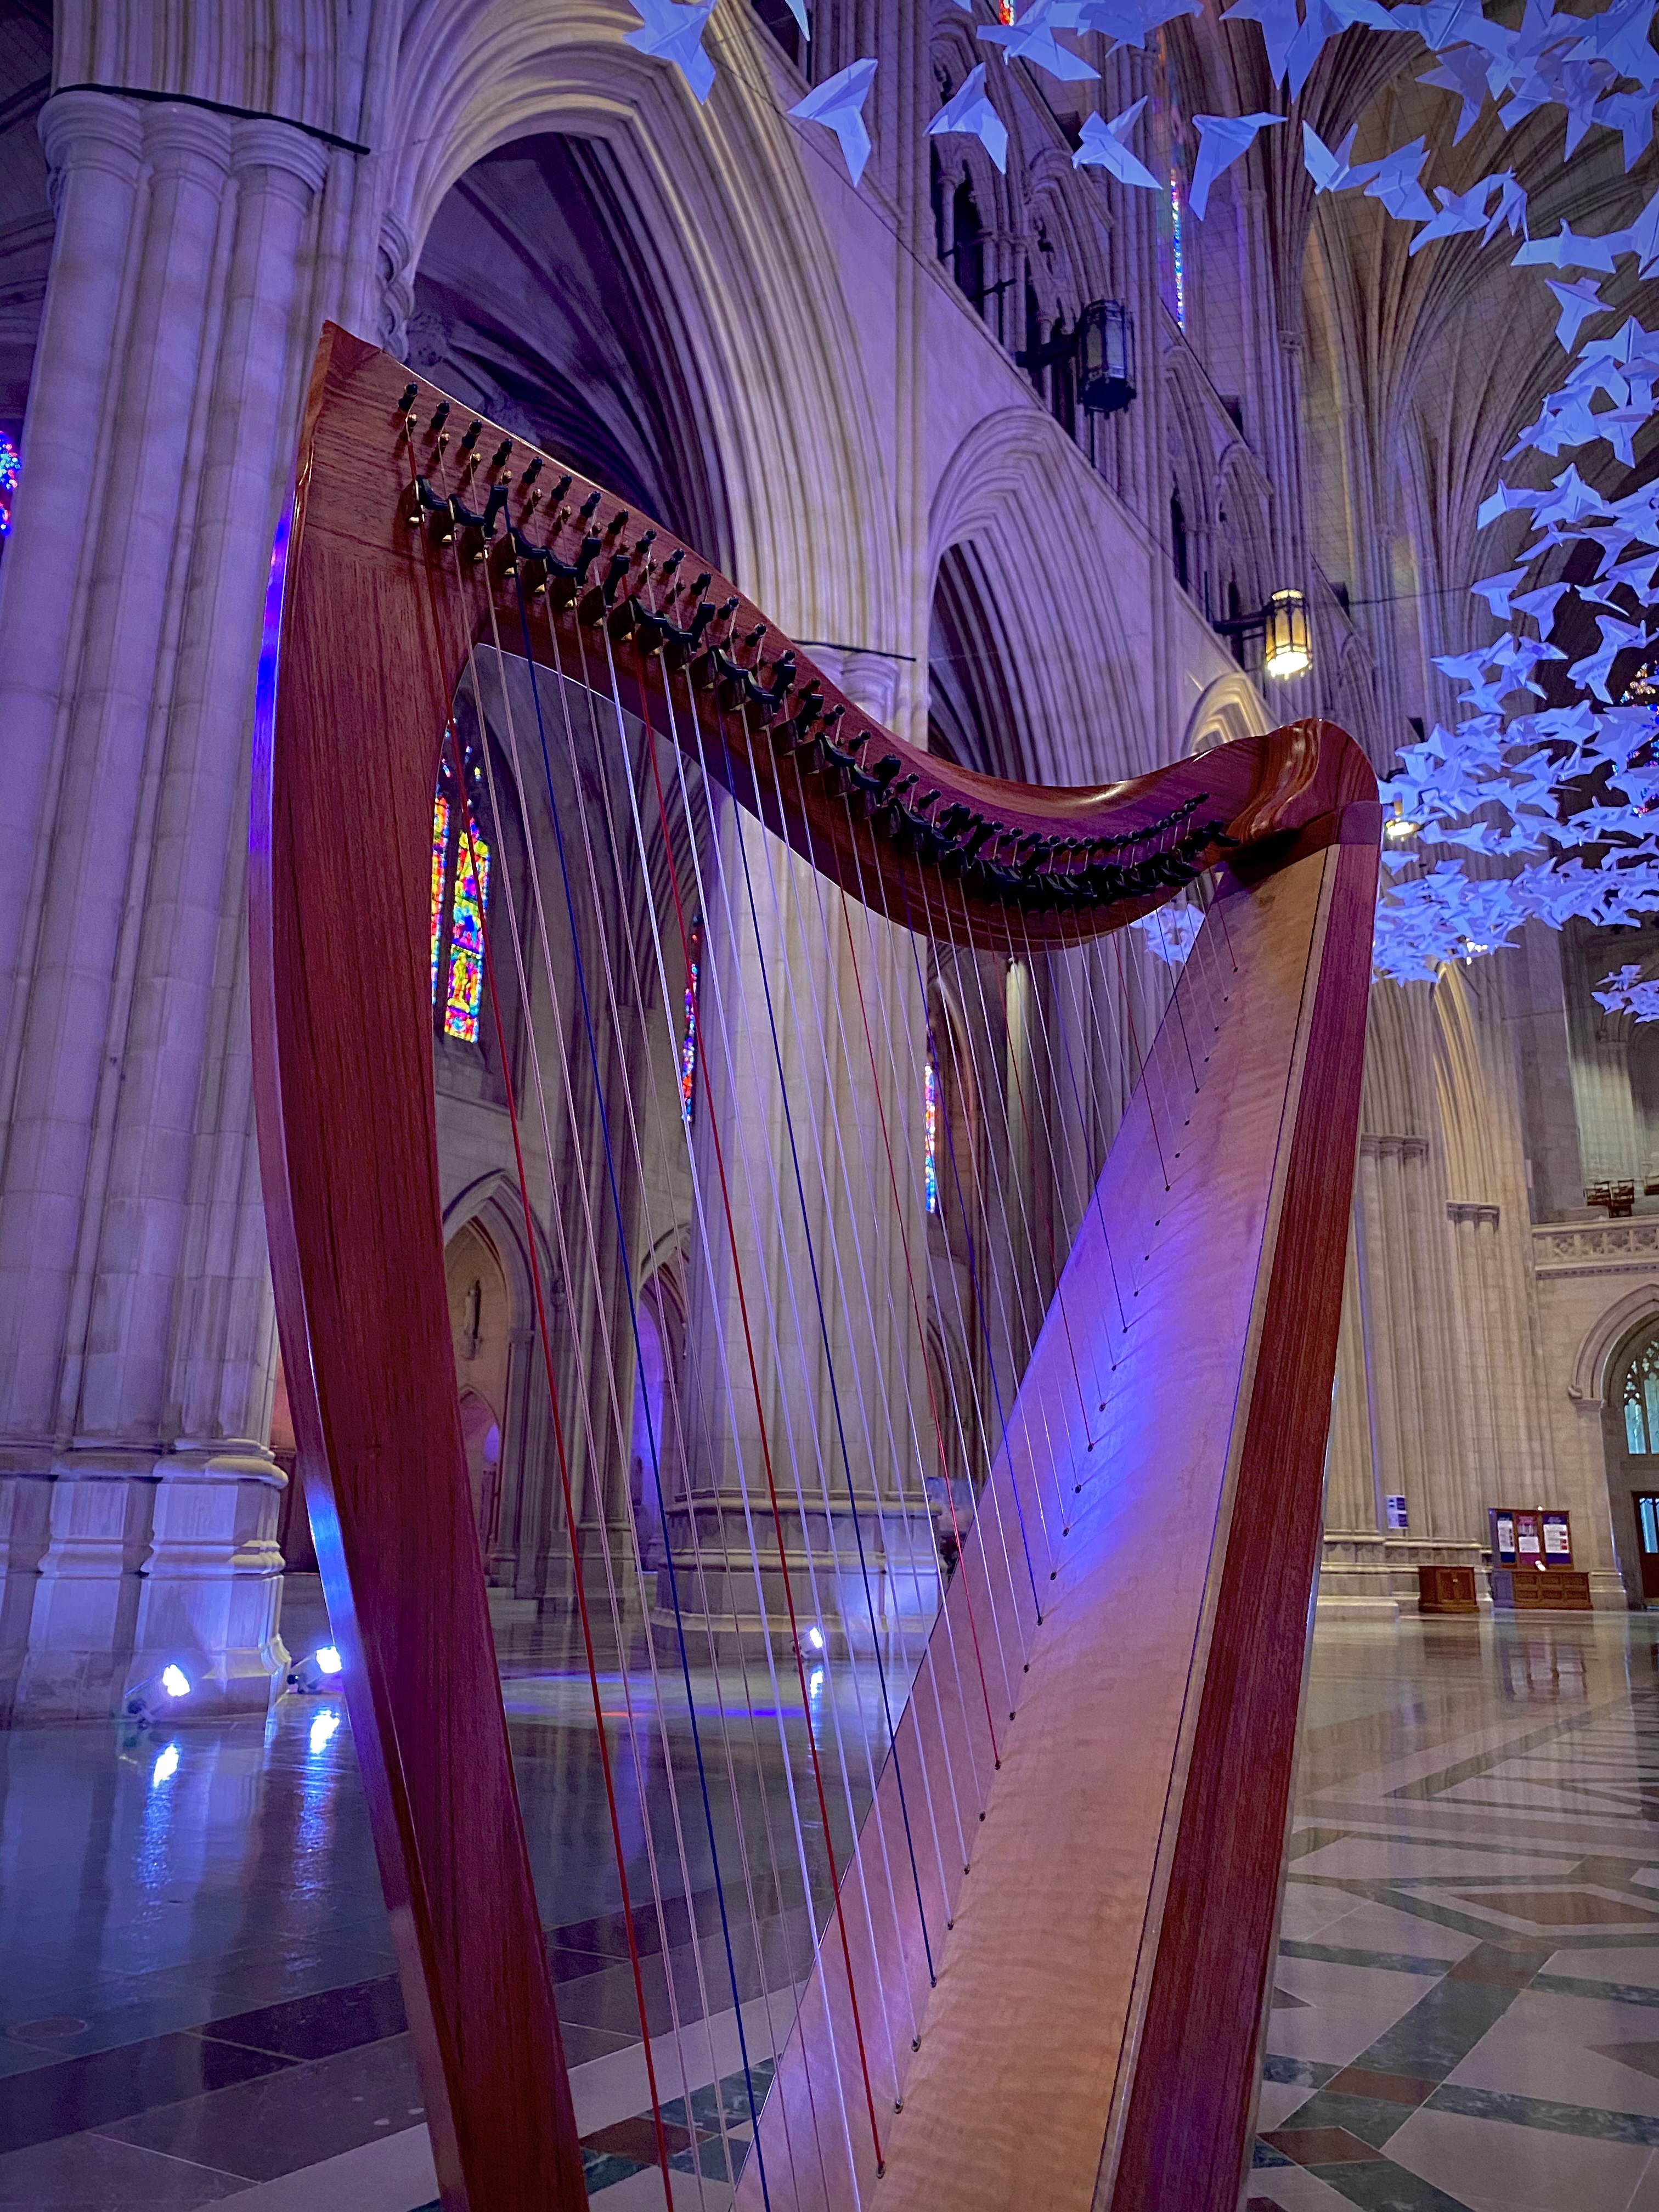 dusty-strings-at-the-national-cathedral-from-kara-welch.jpg